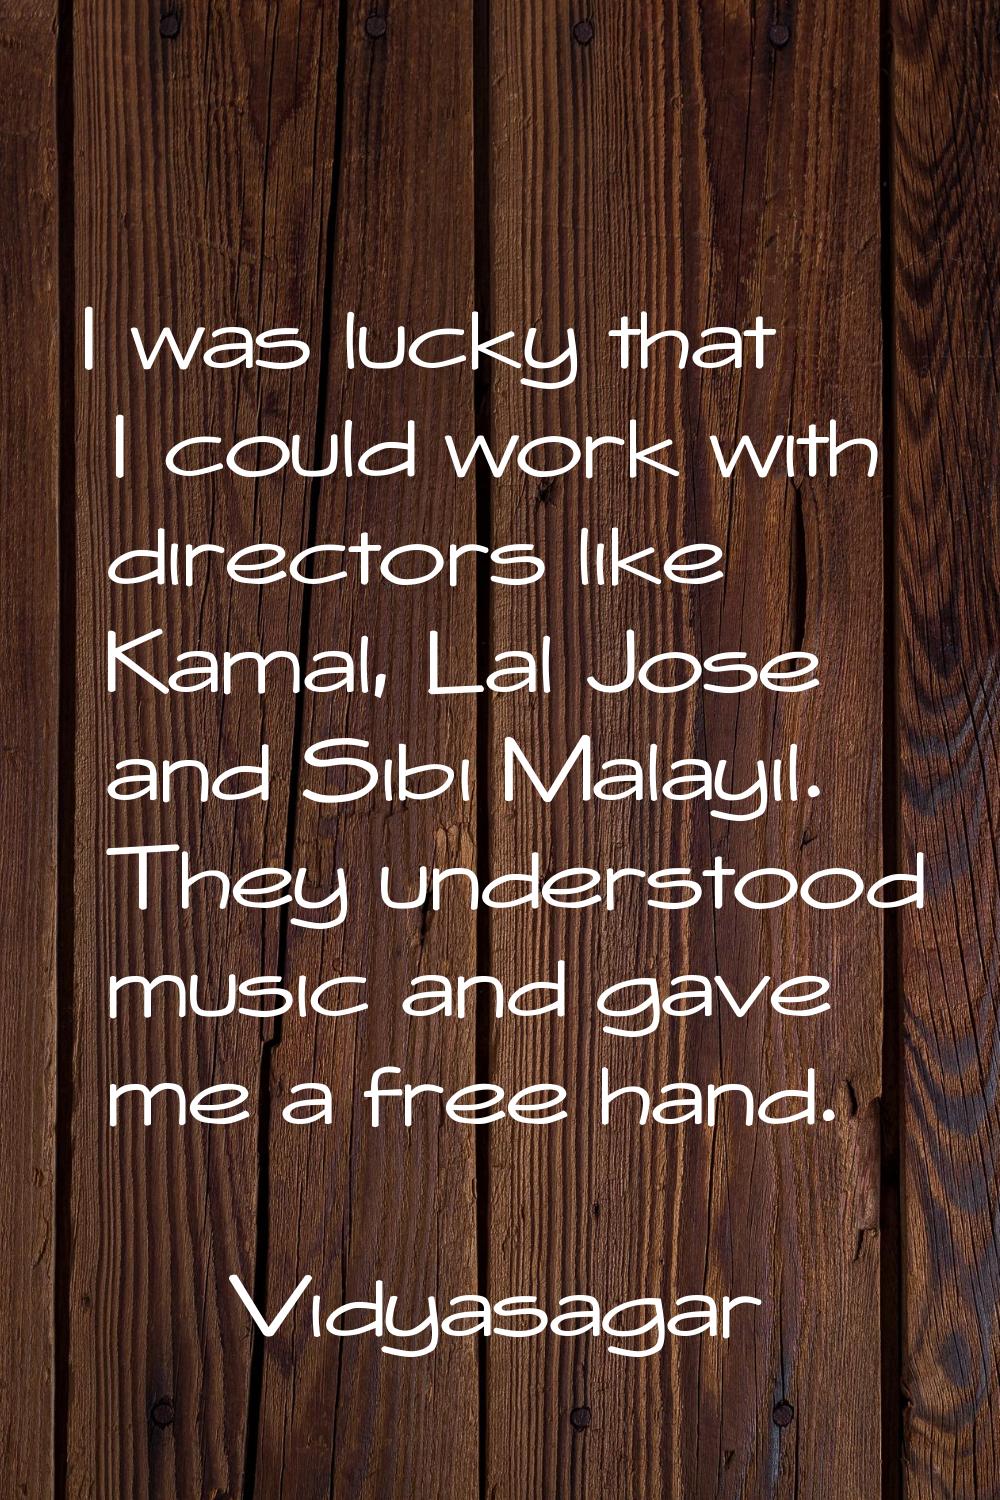 I was lucky that I could work with directors like Kamal, Lal Jose and Sibi Malayil. They understood